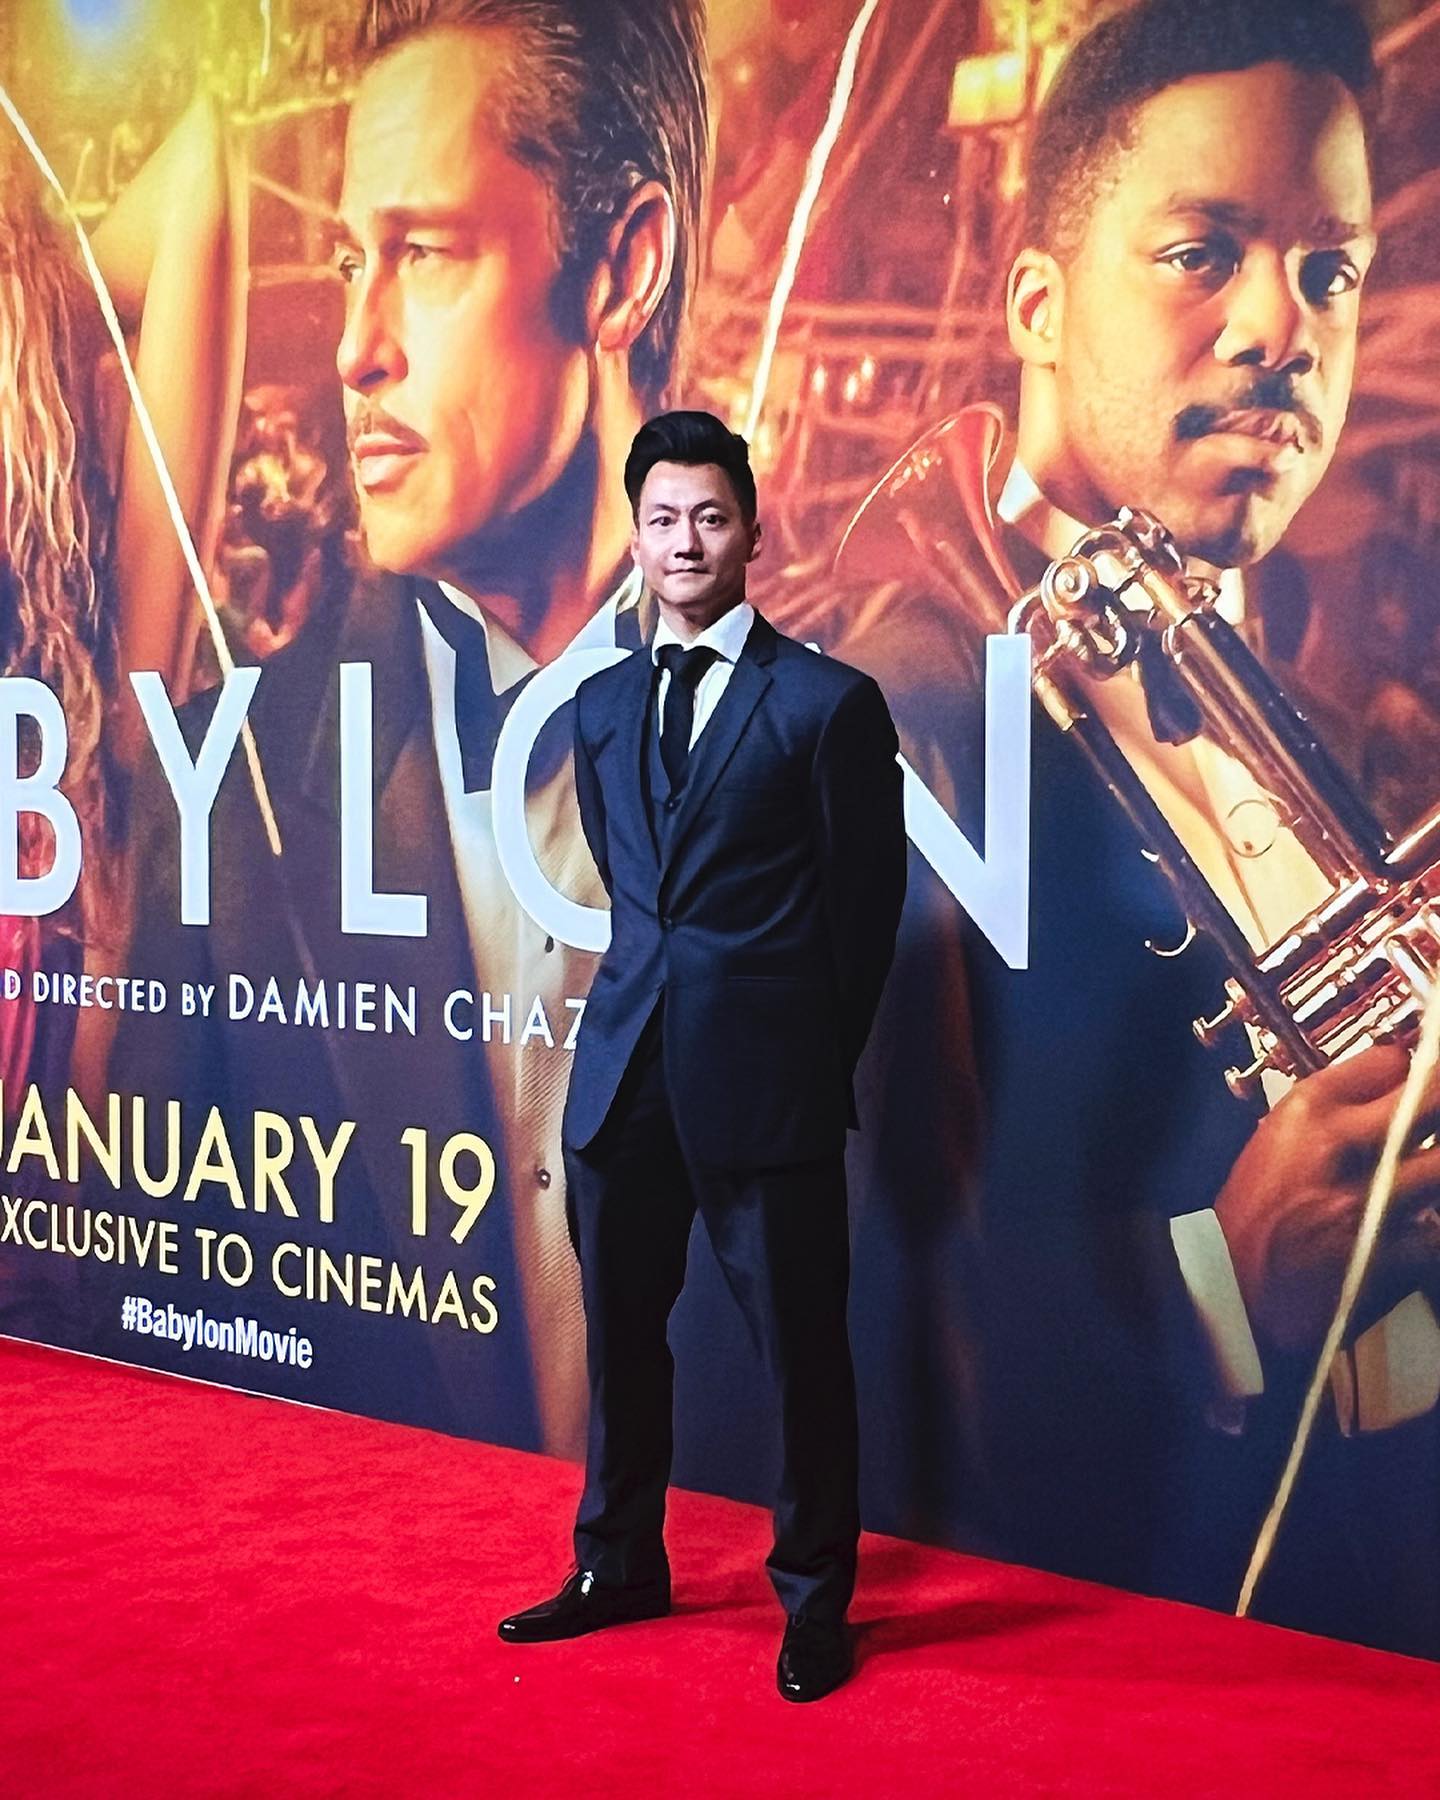 Suit up at the black and tie Babylon red carpet movie premiere #babylon #suitup #redcarpet #paramountpictures #suitandti